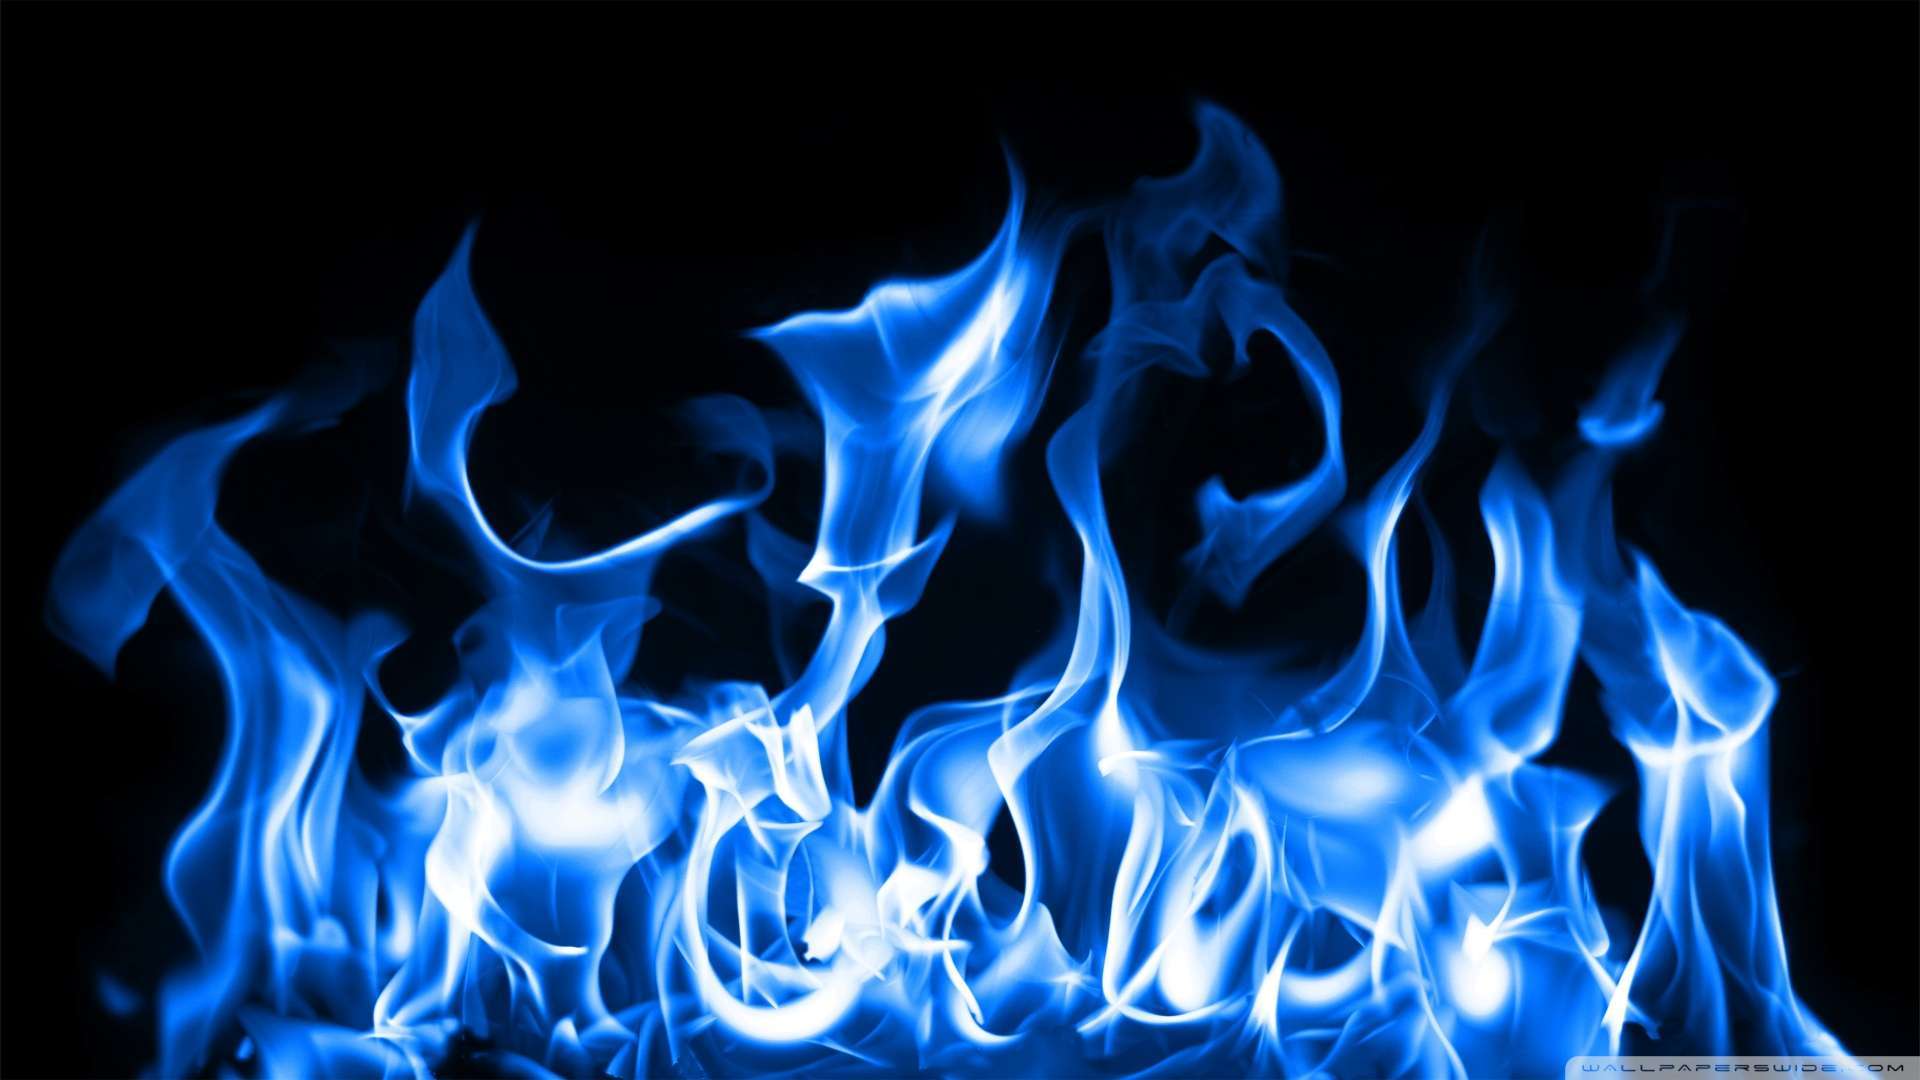 Wallpaper Blue Fire Wallpaper 1080p HD Upload at January 7 2014 by